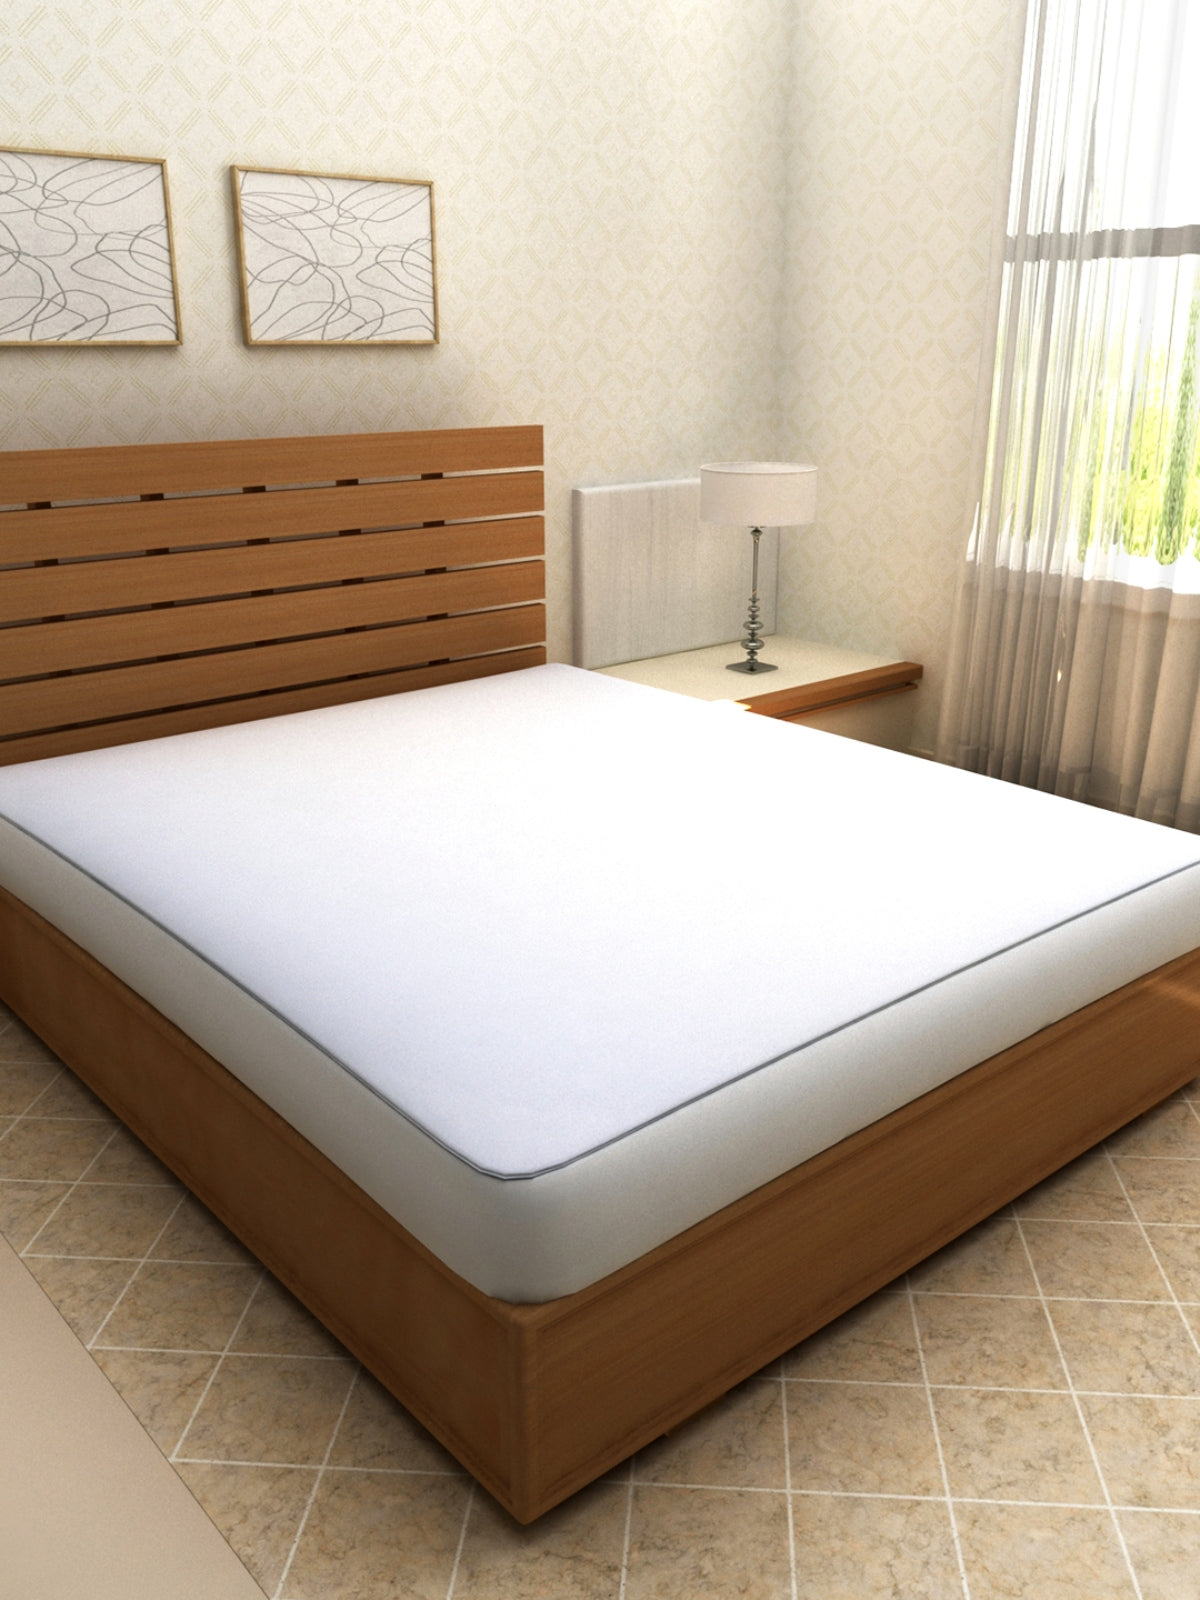 White Terry Cloth Waterproof Mattress Protector for King Size